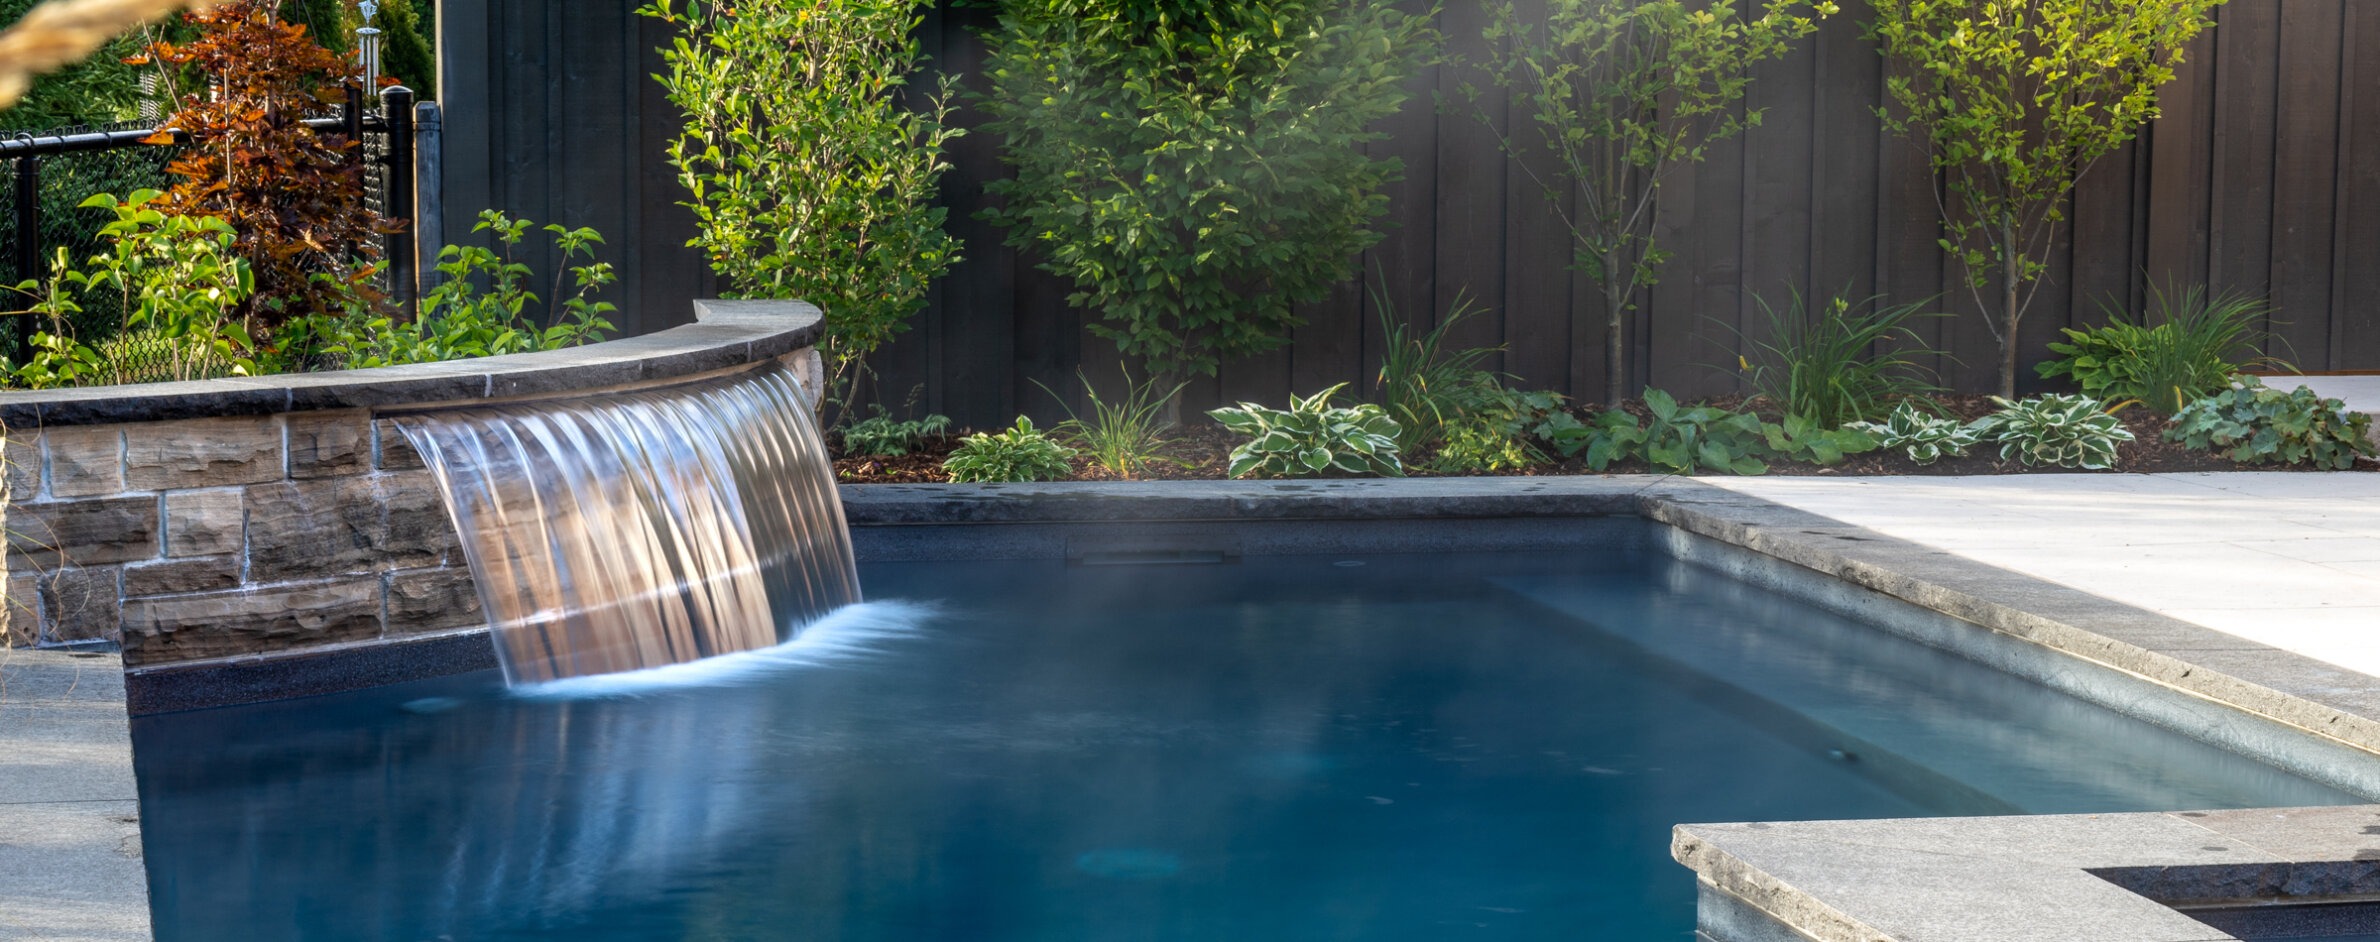 An outdoor swimming pool with a smooth waterfall edge, surrounded by lush greenery and a dark fence, depicting a serene backyard setting.